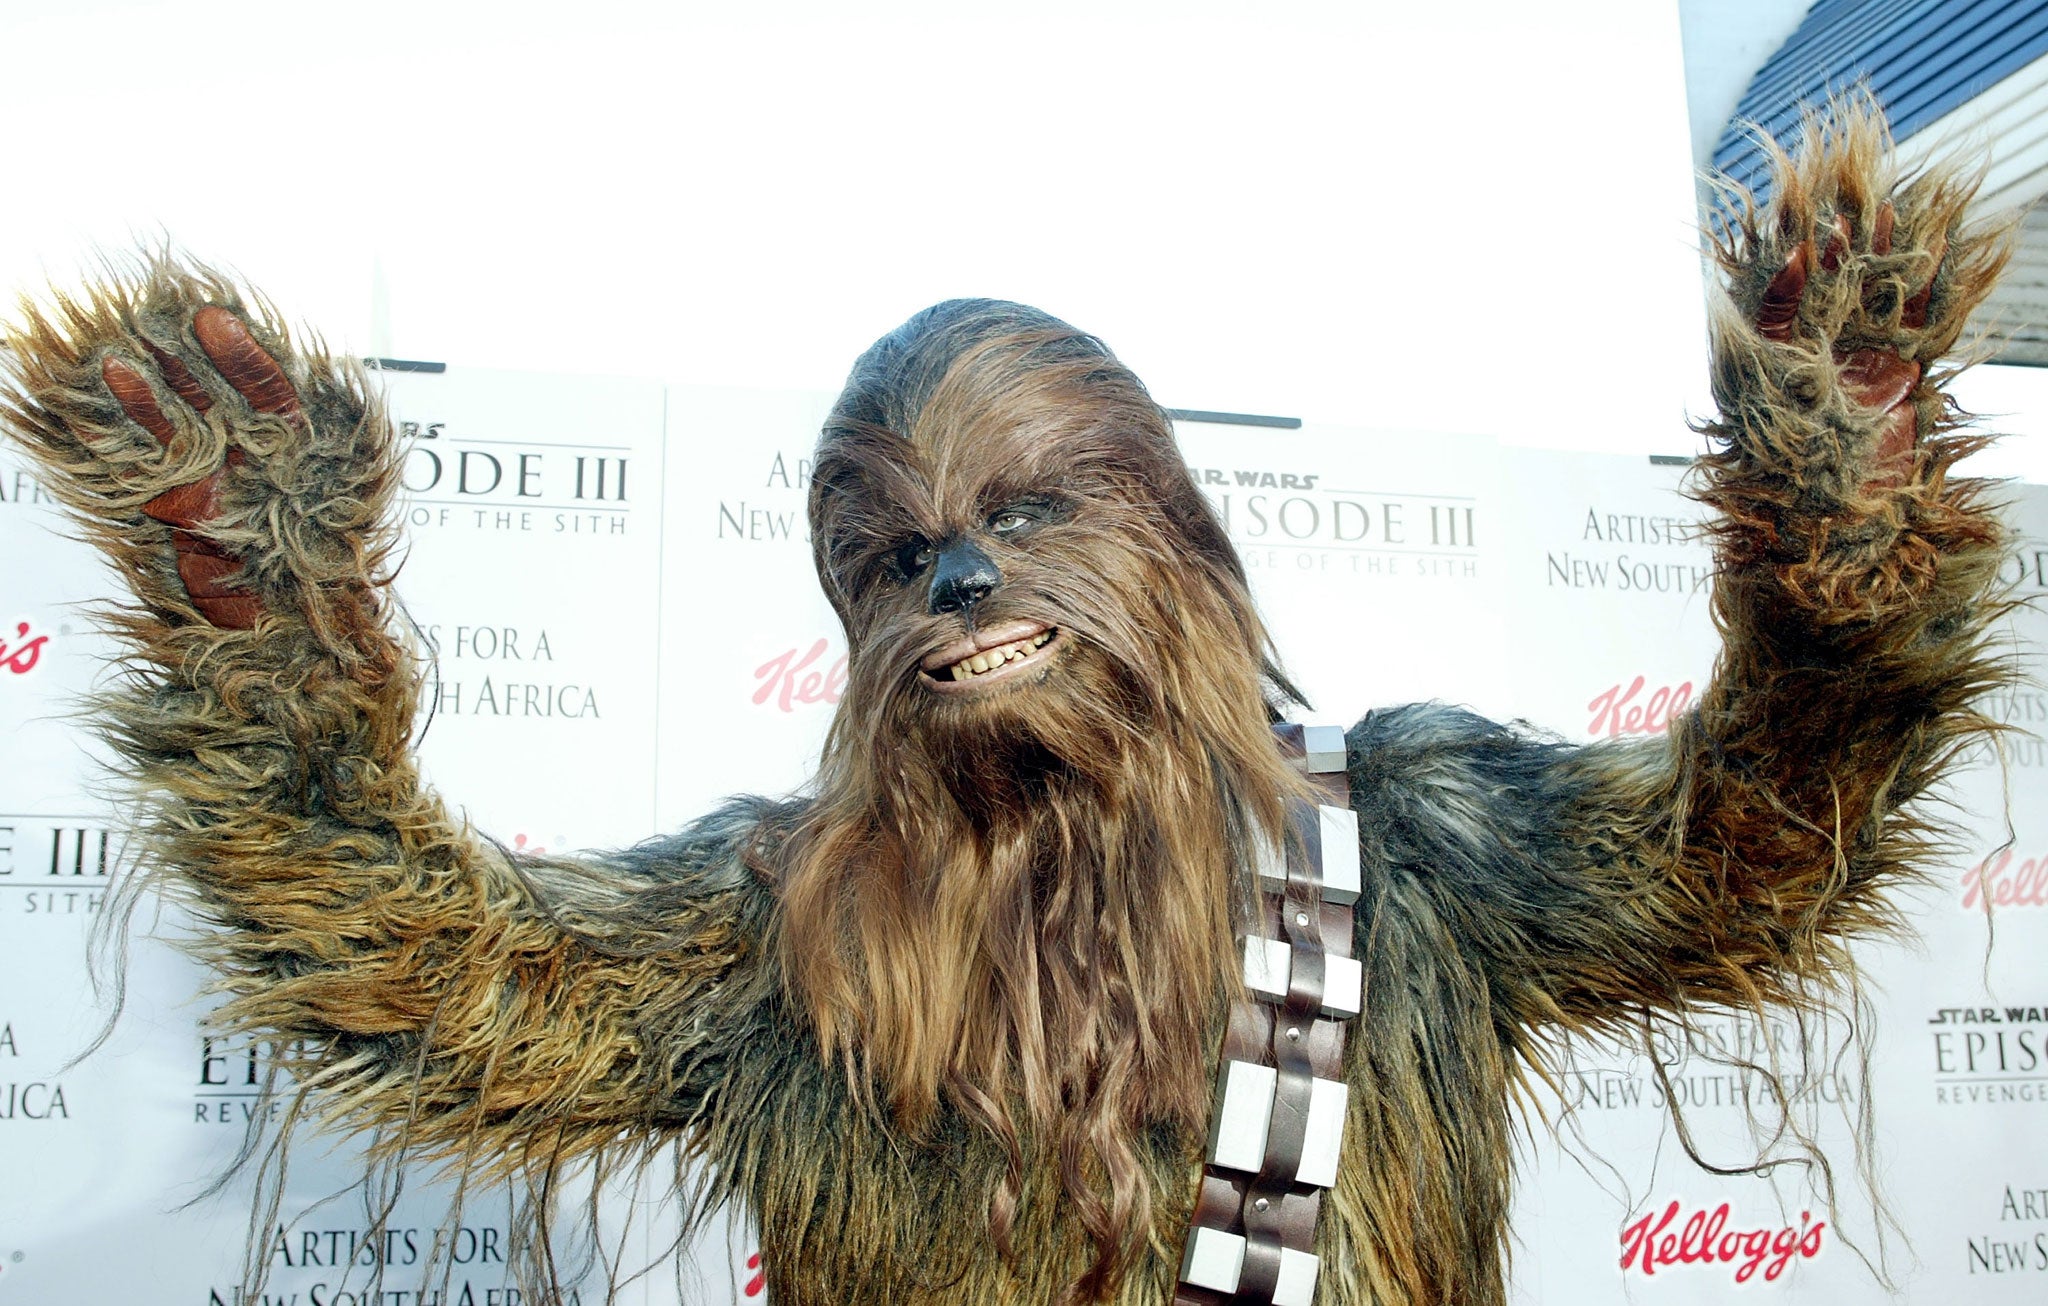 Chewbacca poses at Star Wars premiere